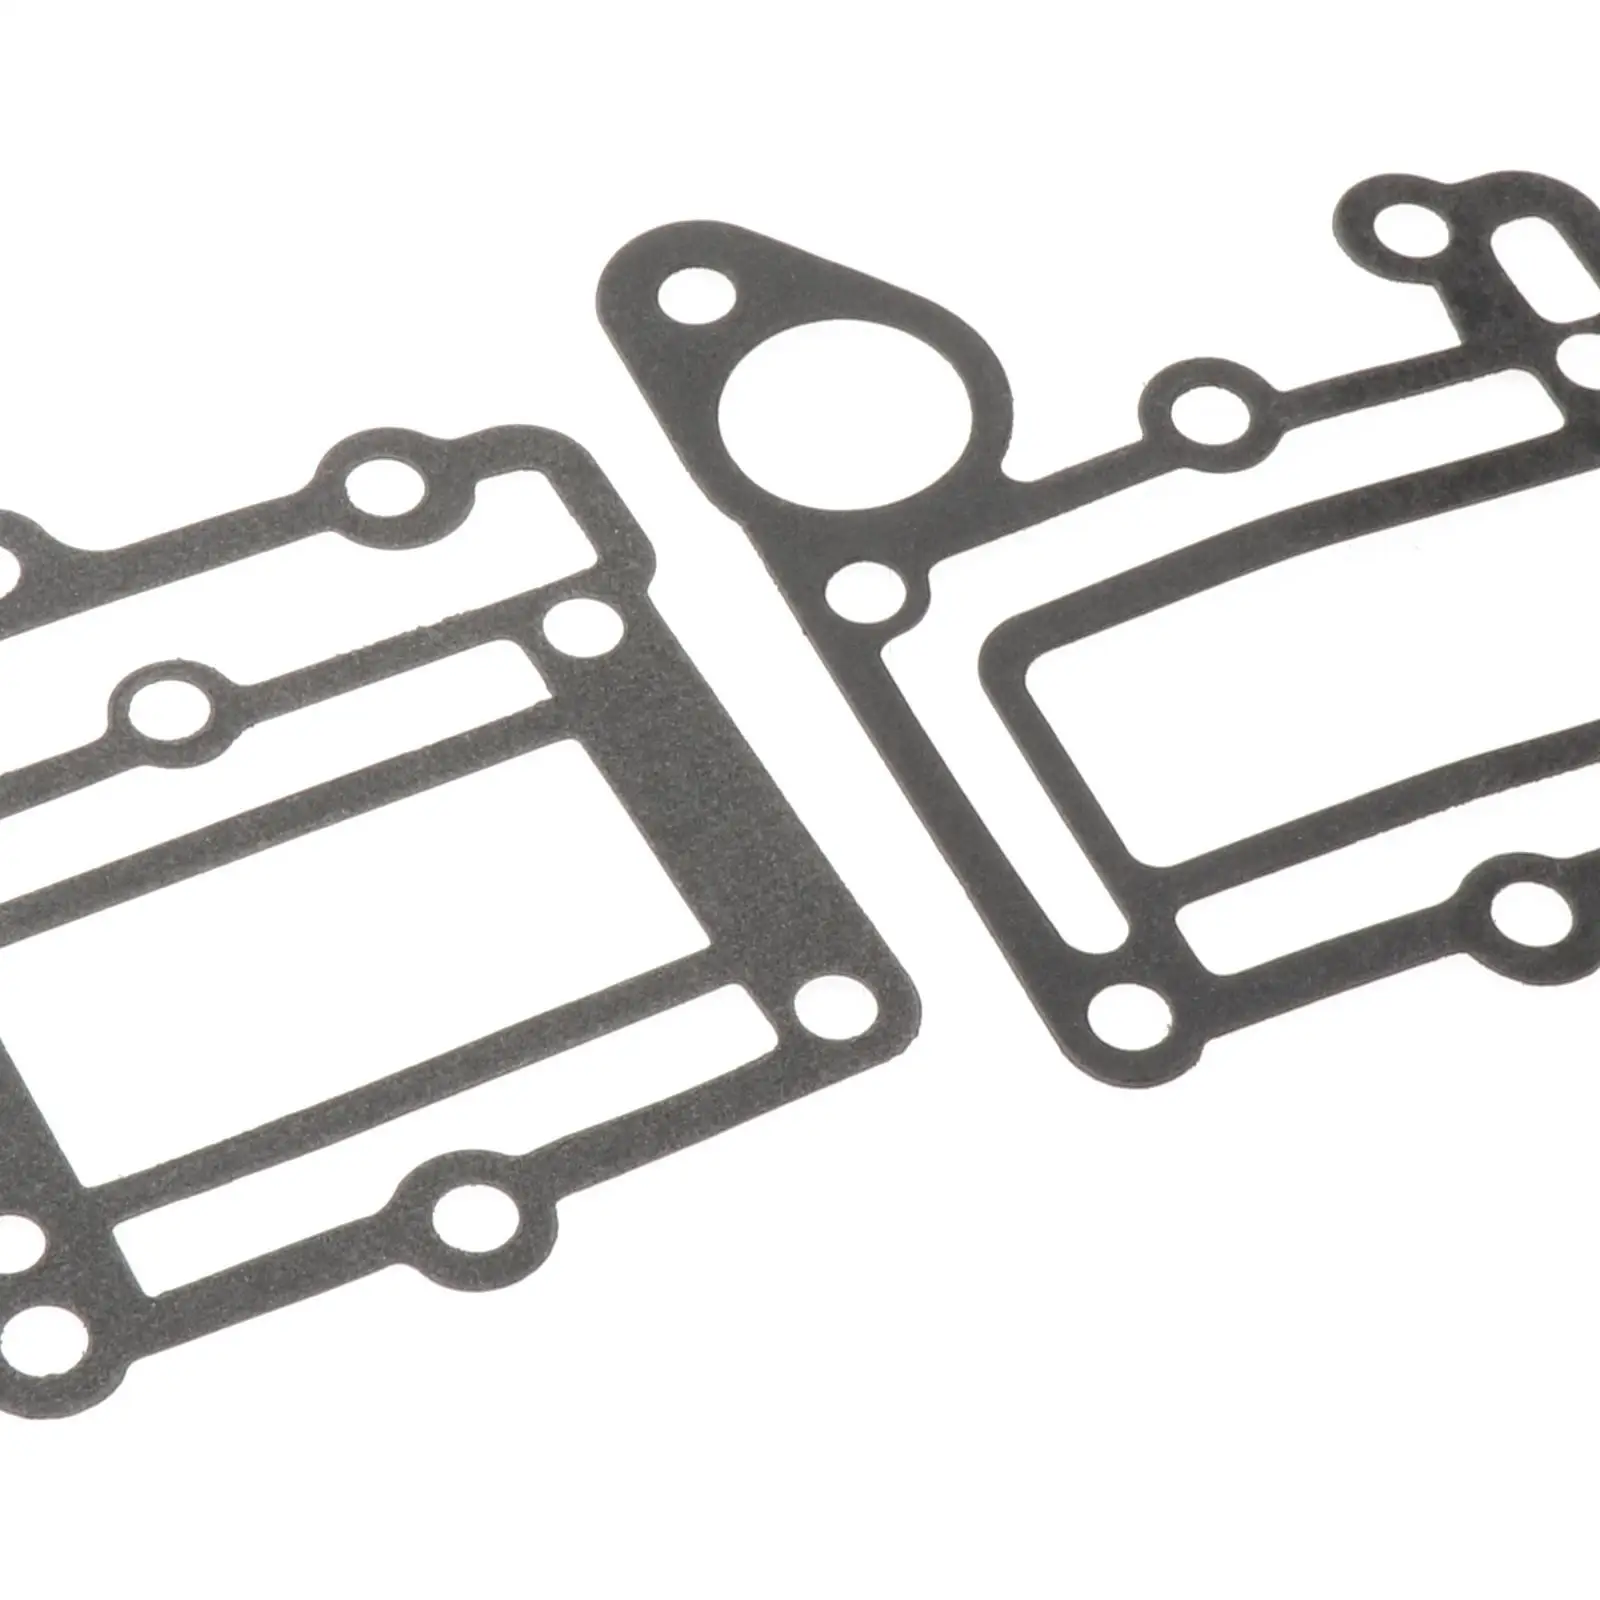 2 Pieces Exhaust Jacket Gaskets 6E0-41112-A1 6E0-41114-A0 Outboard Motors for